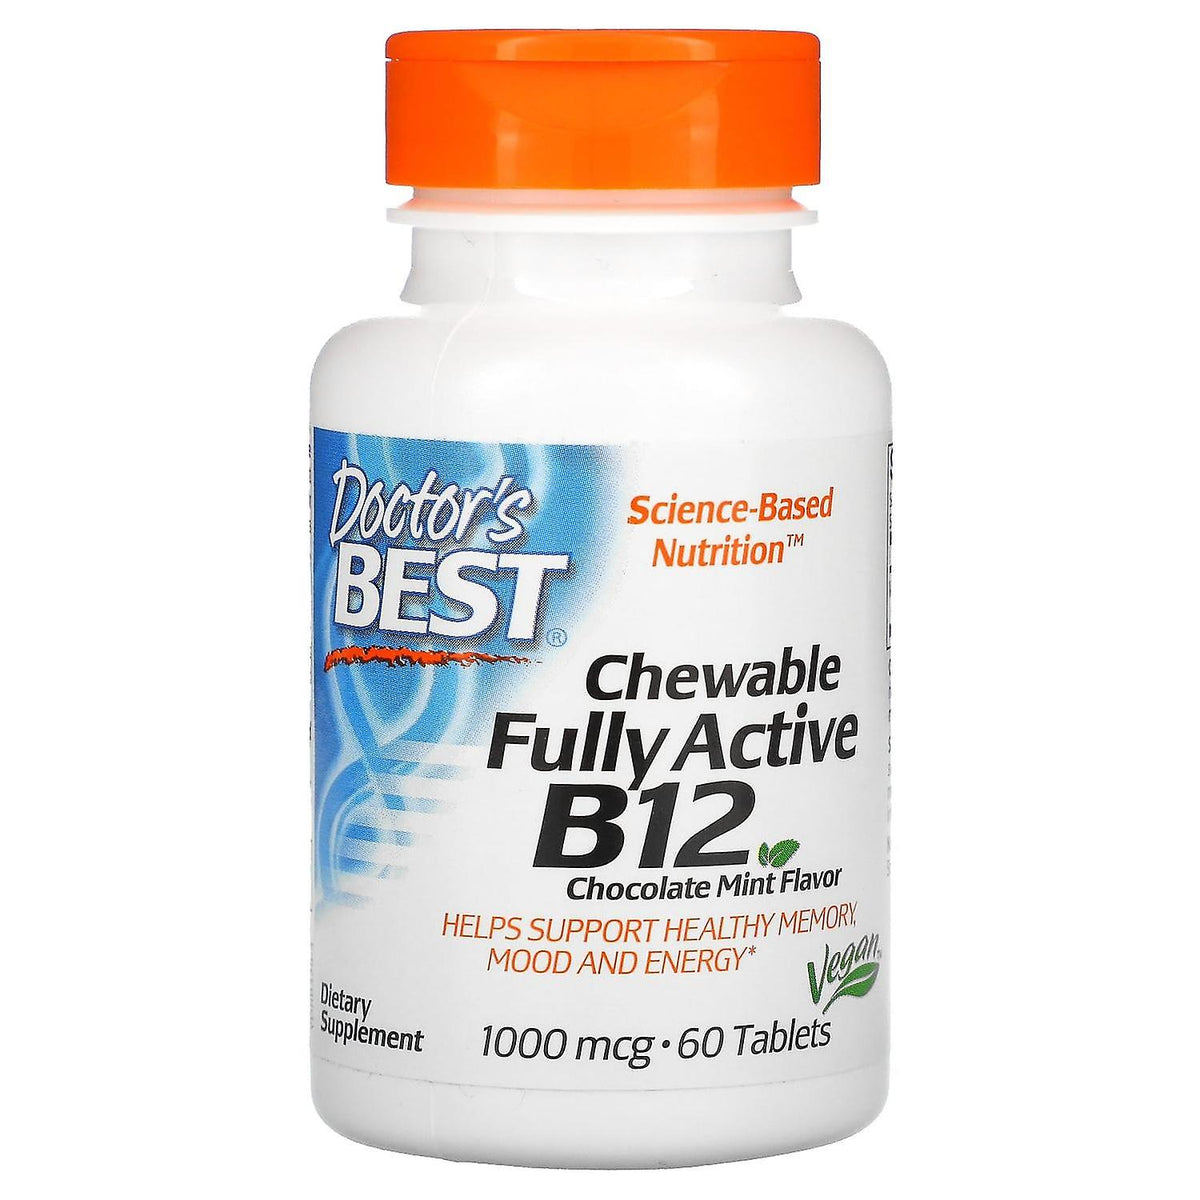 Doctor's Best - Chewable Fully Active B12 - 1000mcg - 60 Tabs